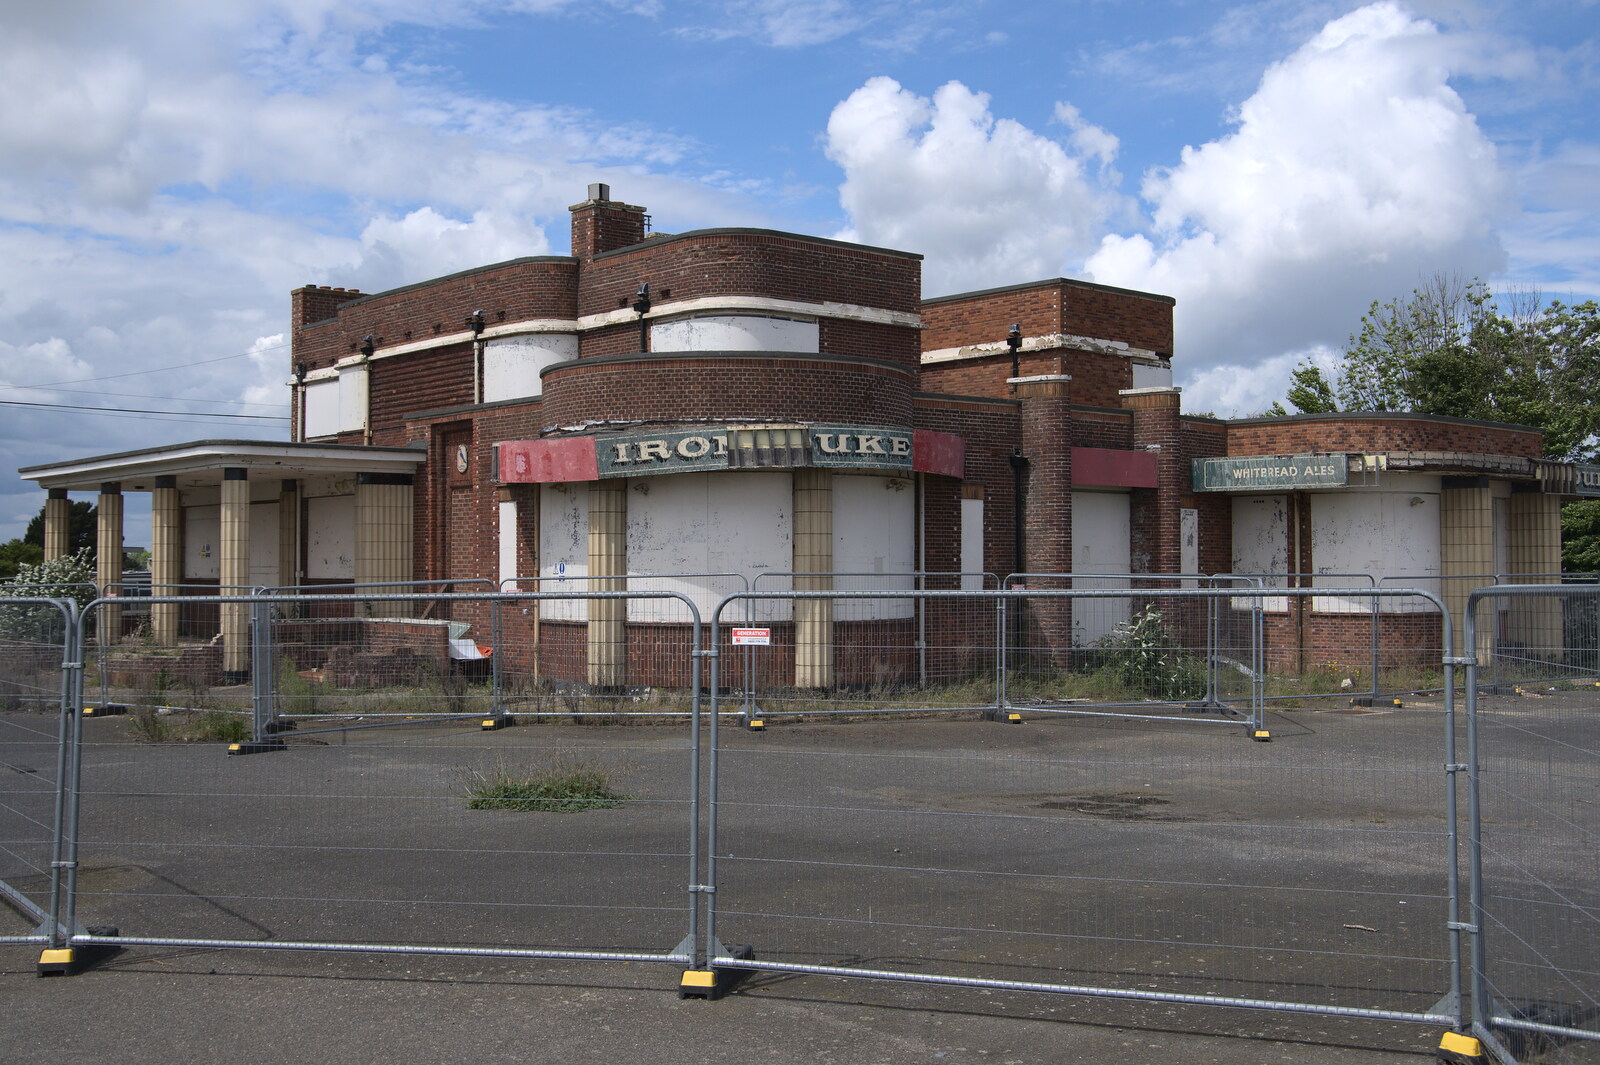 The awesomely derelict Iron Duke pub from Faded Seaside Glamour: A Weekend in Great Yarmouth, Norfolk - 29th May 2022